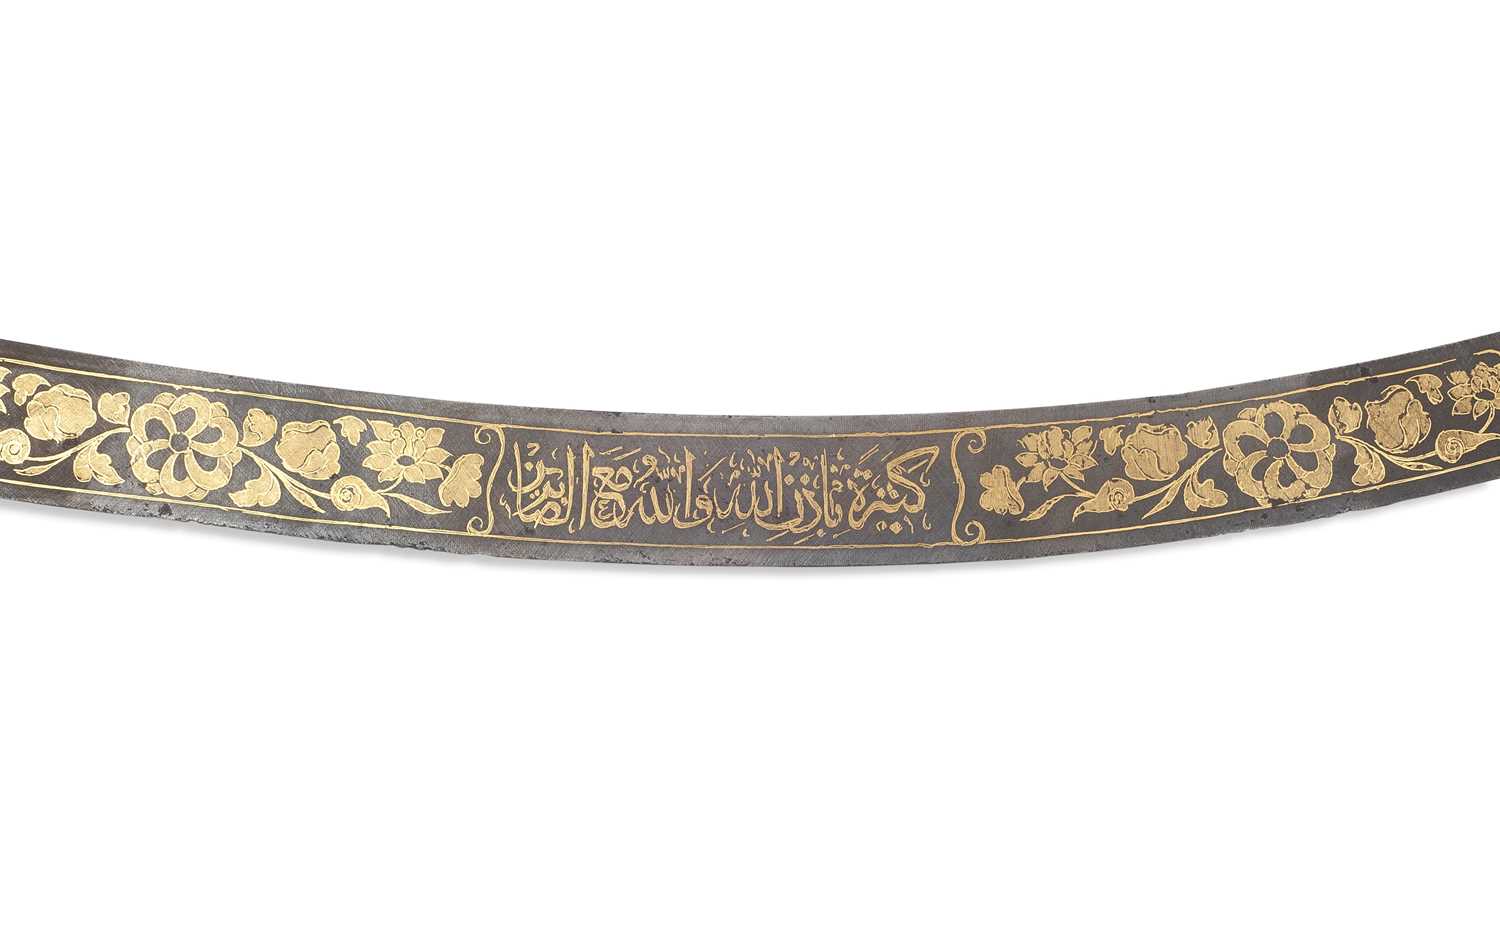 A LATE 18TH / EARLY 19TH CENTURY OTTOMAN (TURKEY) GOLD DAMASCENED SWORD (SHAMSHIR) - Image 3 of 5